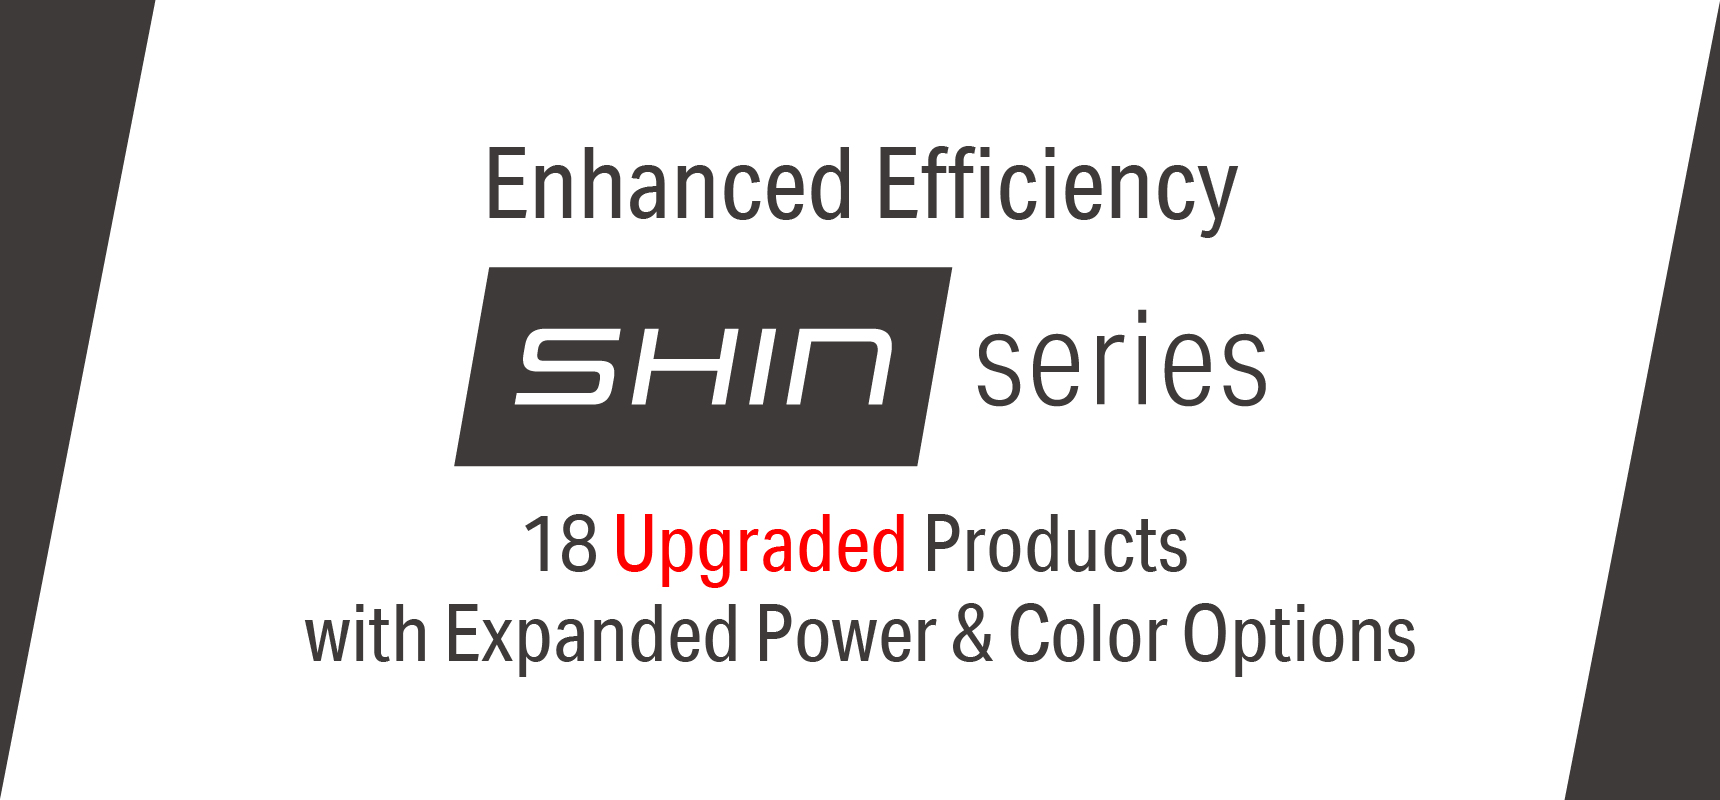 Long-awaited new product SHIN Series Updated with low wattage high lumen LED series